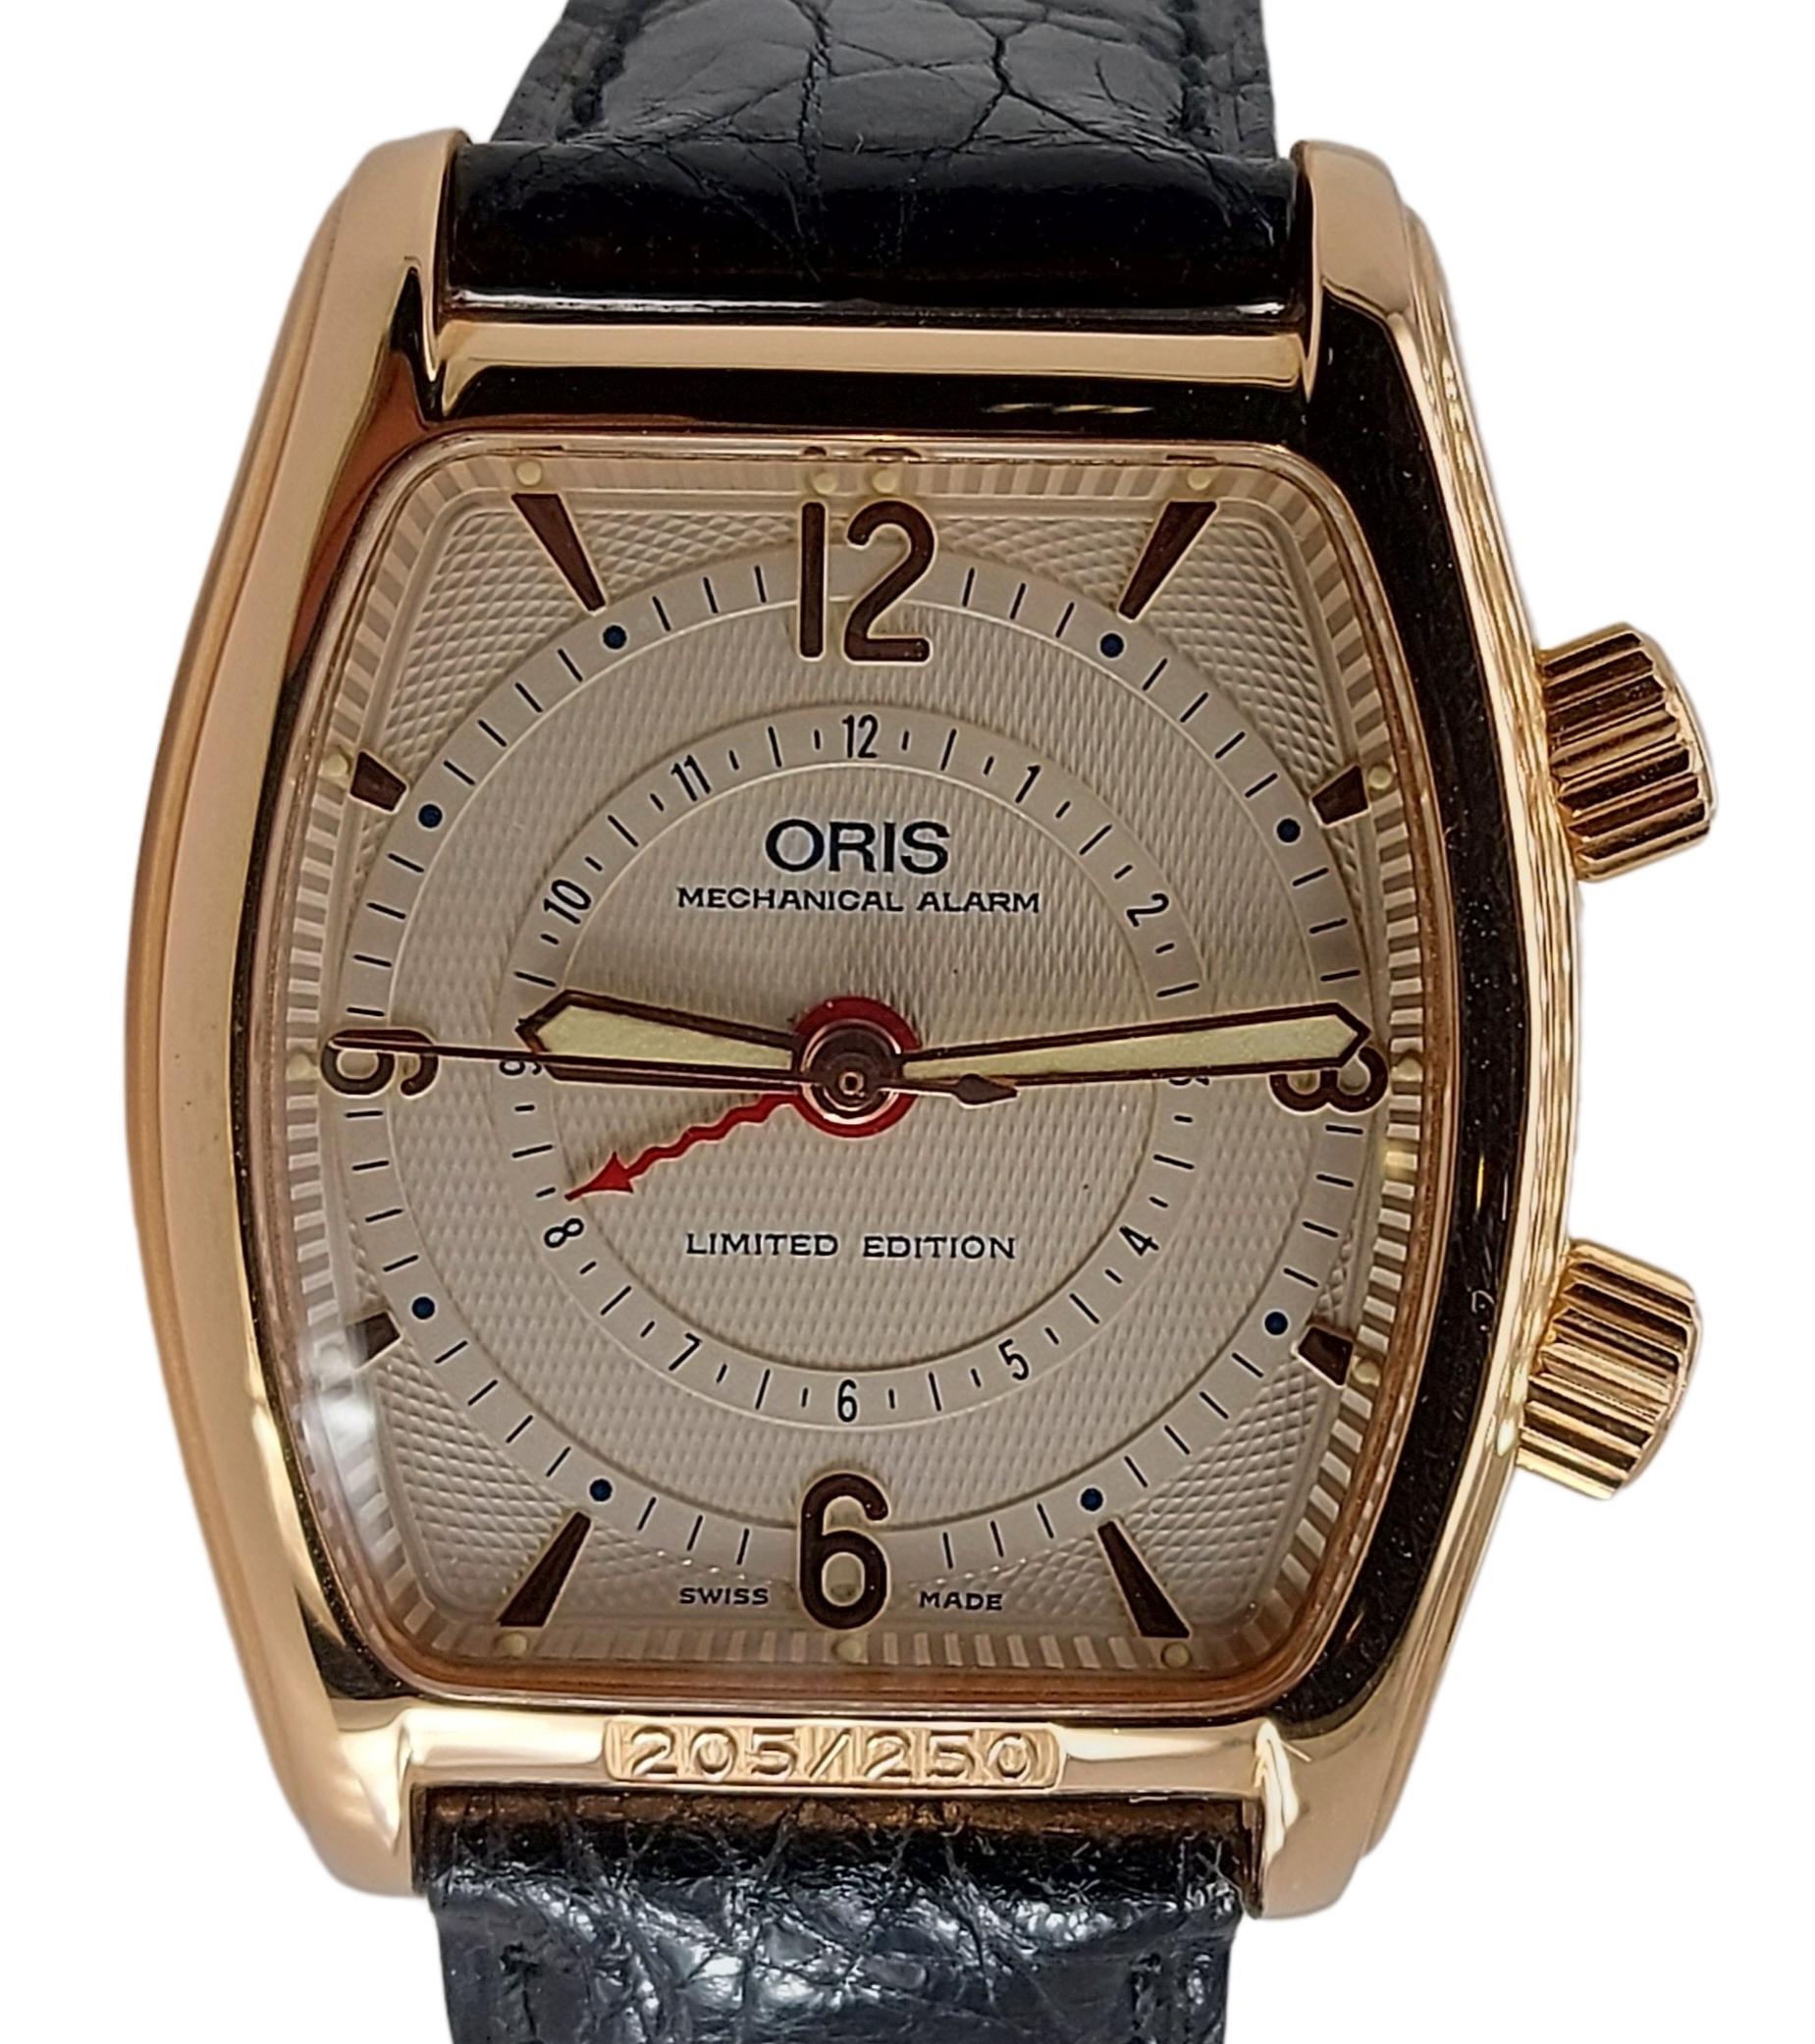 Oris Reveil Limited Edition Mechanical Alarm 18kt Gold, New with Box & Papers Neuf - En vente à Antwerp, BE